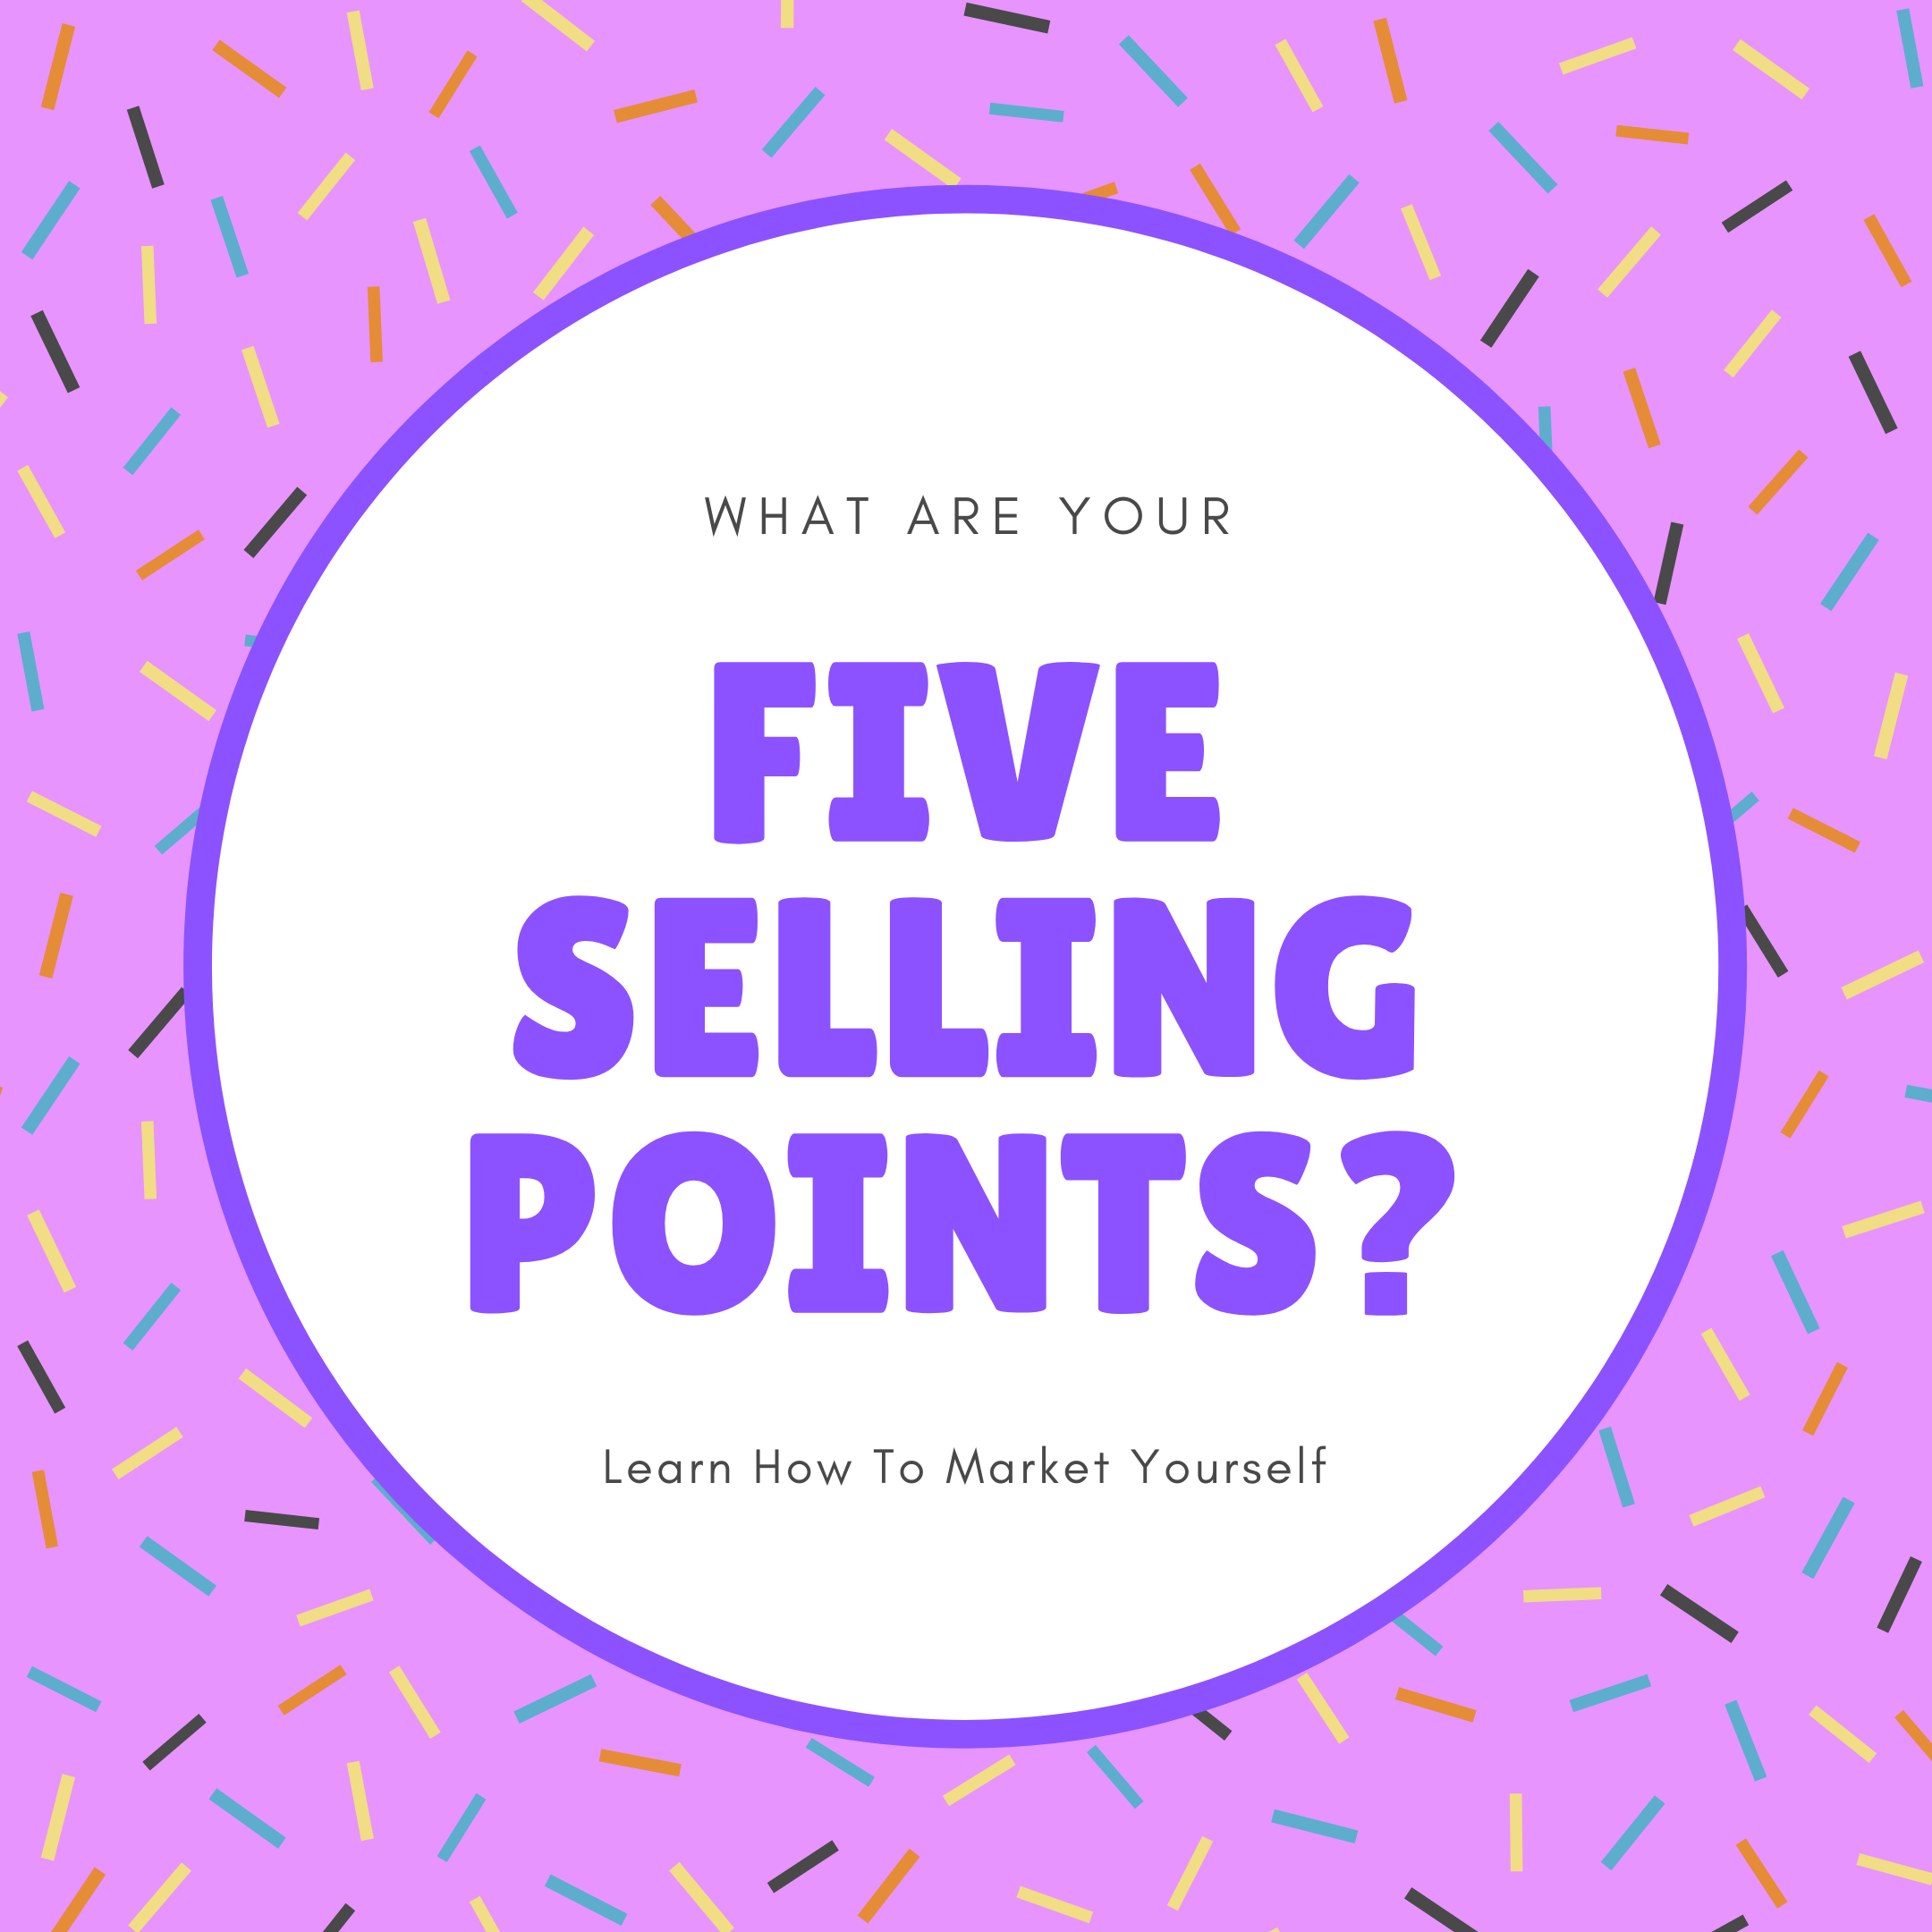 <img src="ana.jpg" alt="ana what are your five selling points"/> 